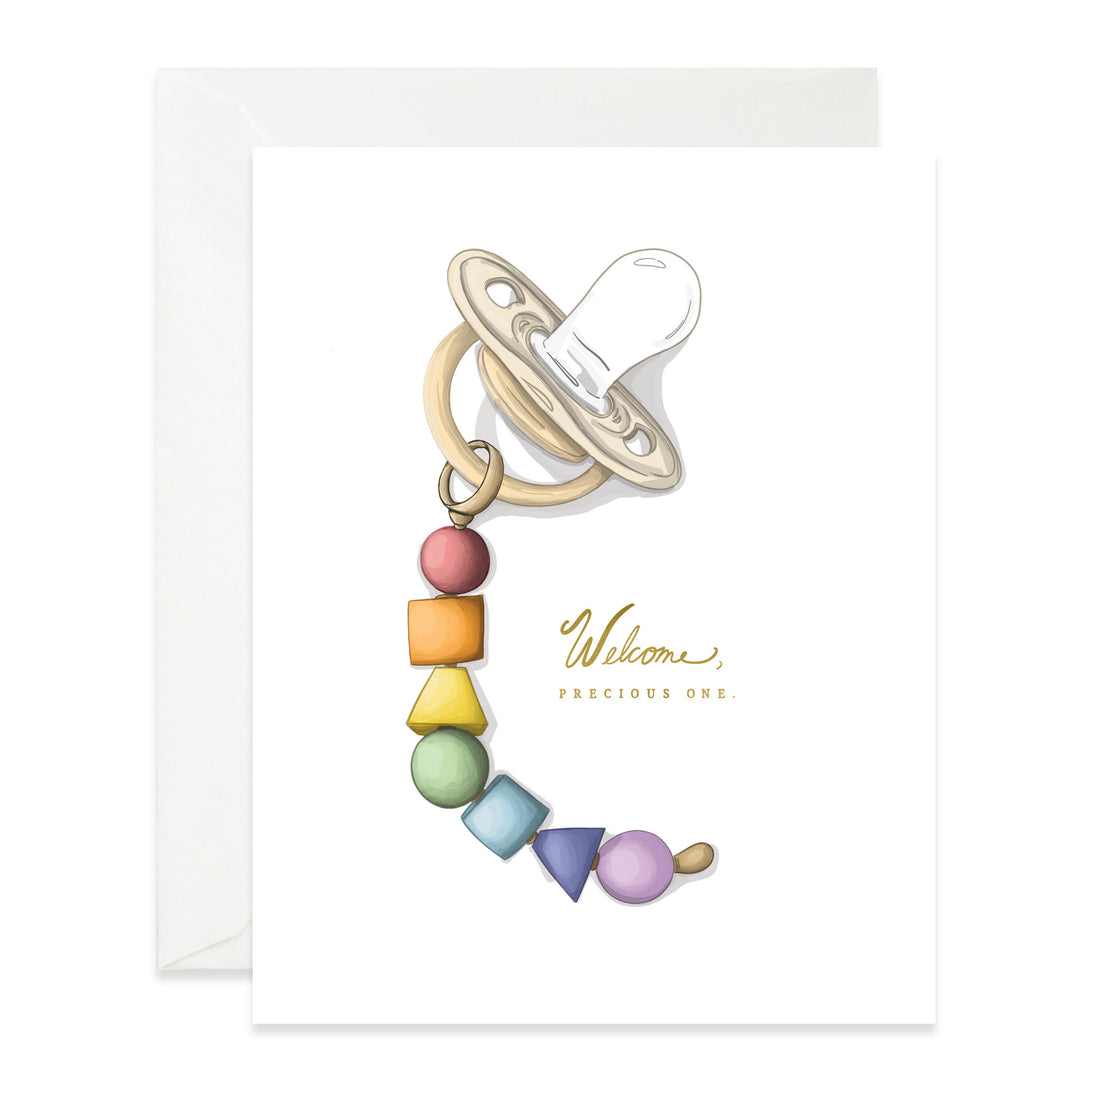 Rainbow Pacifier Card featuring a hand-illustrated pacifier with colorful beads and a welcoming message for a new baby by Good Juju Ink.